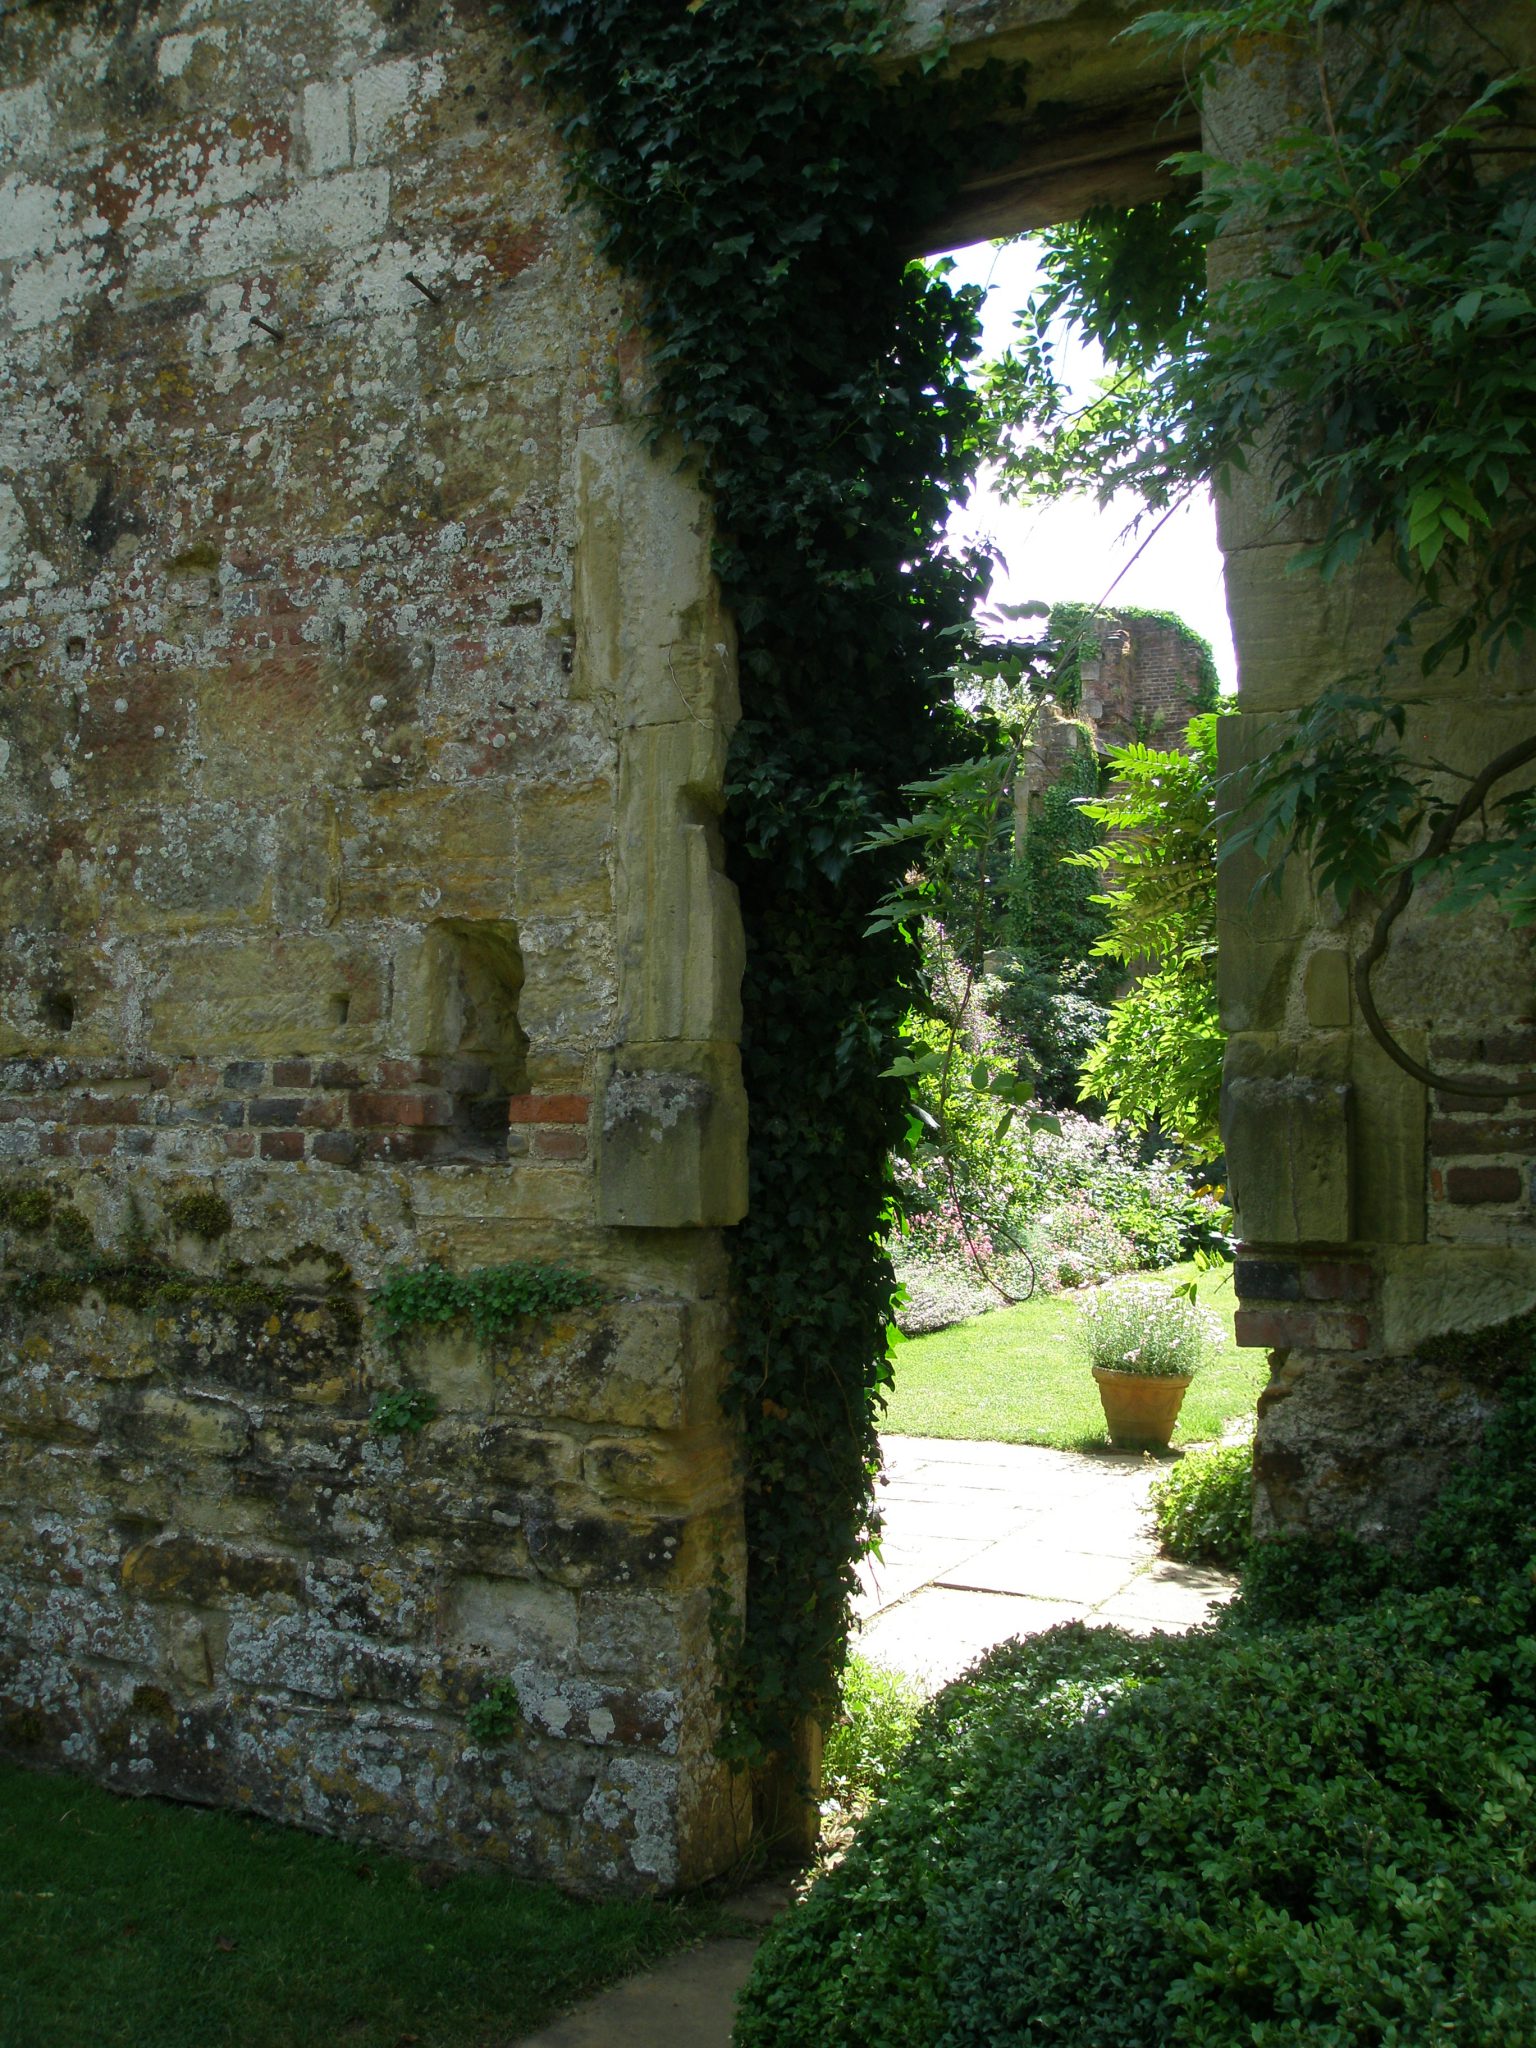 A peek into the small garden that's contained inside the walls of the dismantled, 17th century wing of the Old Castle